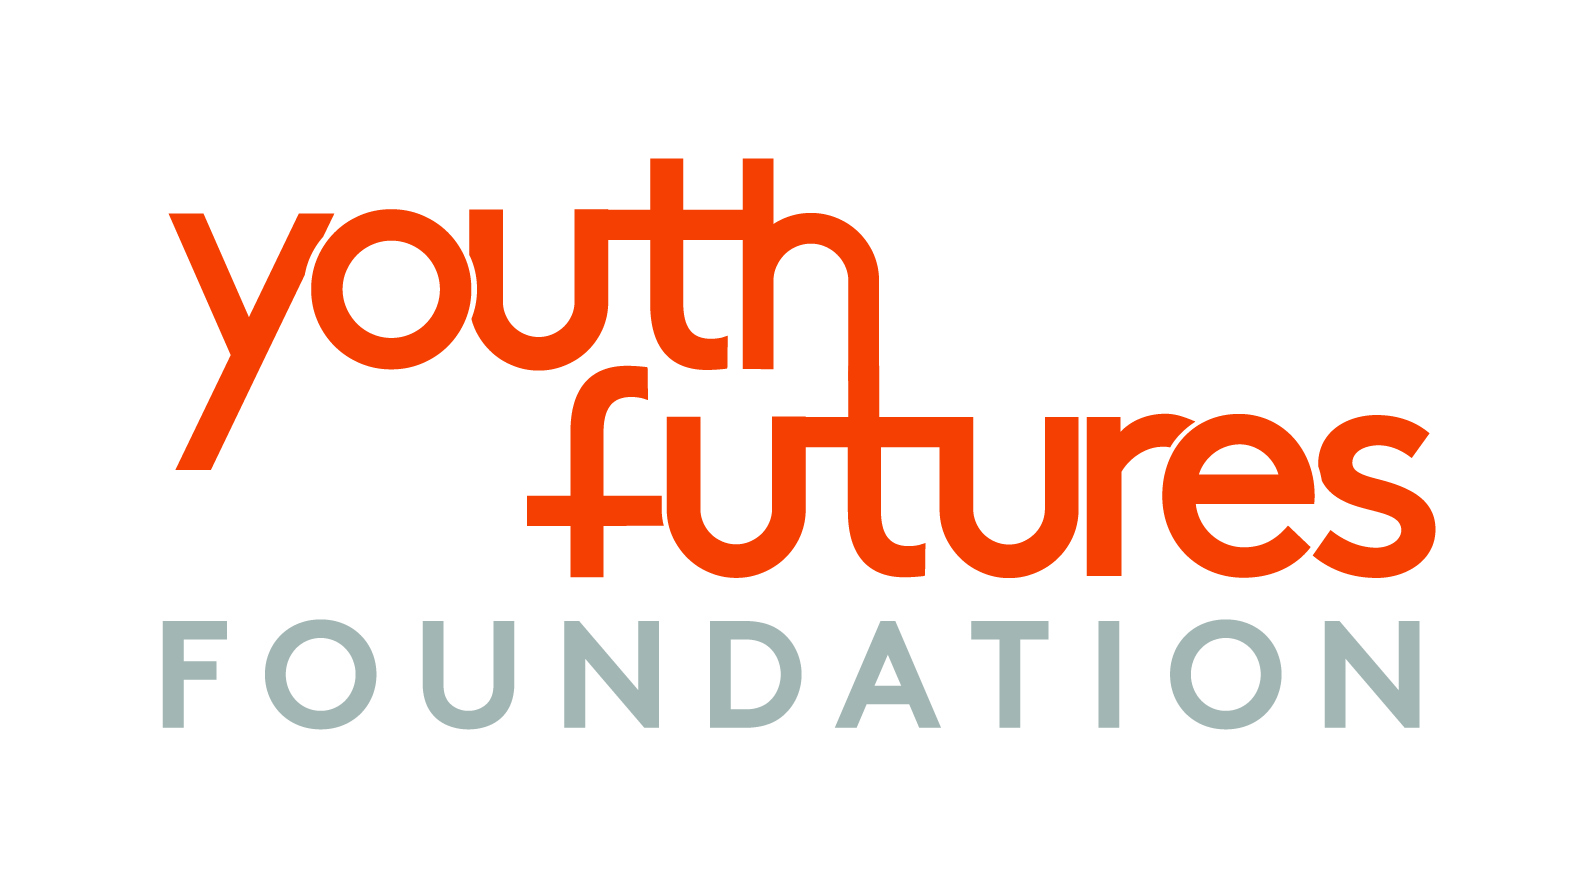 Youth Futures Foundation